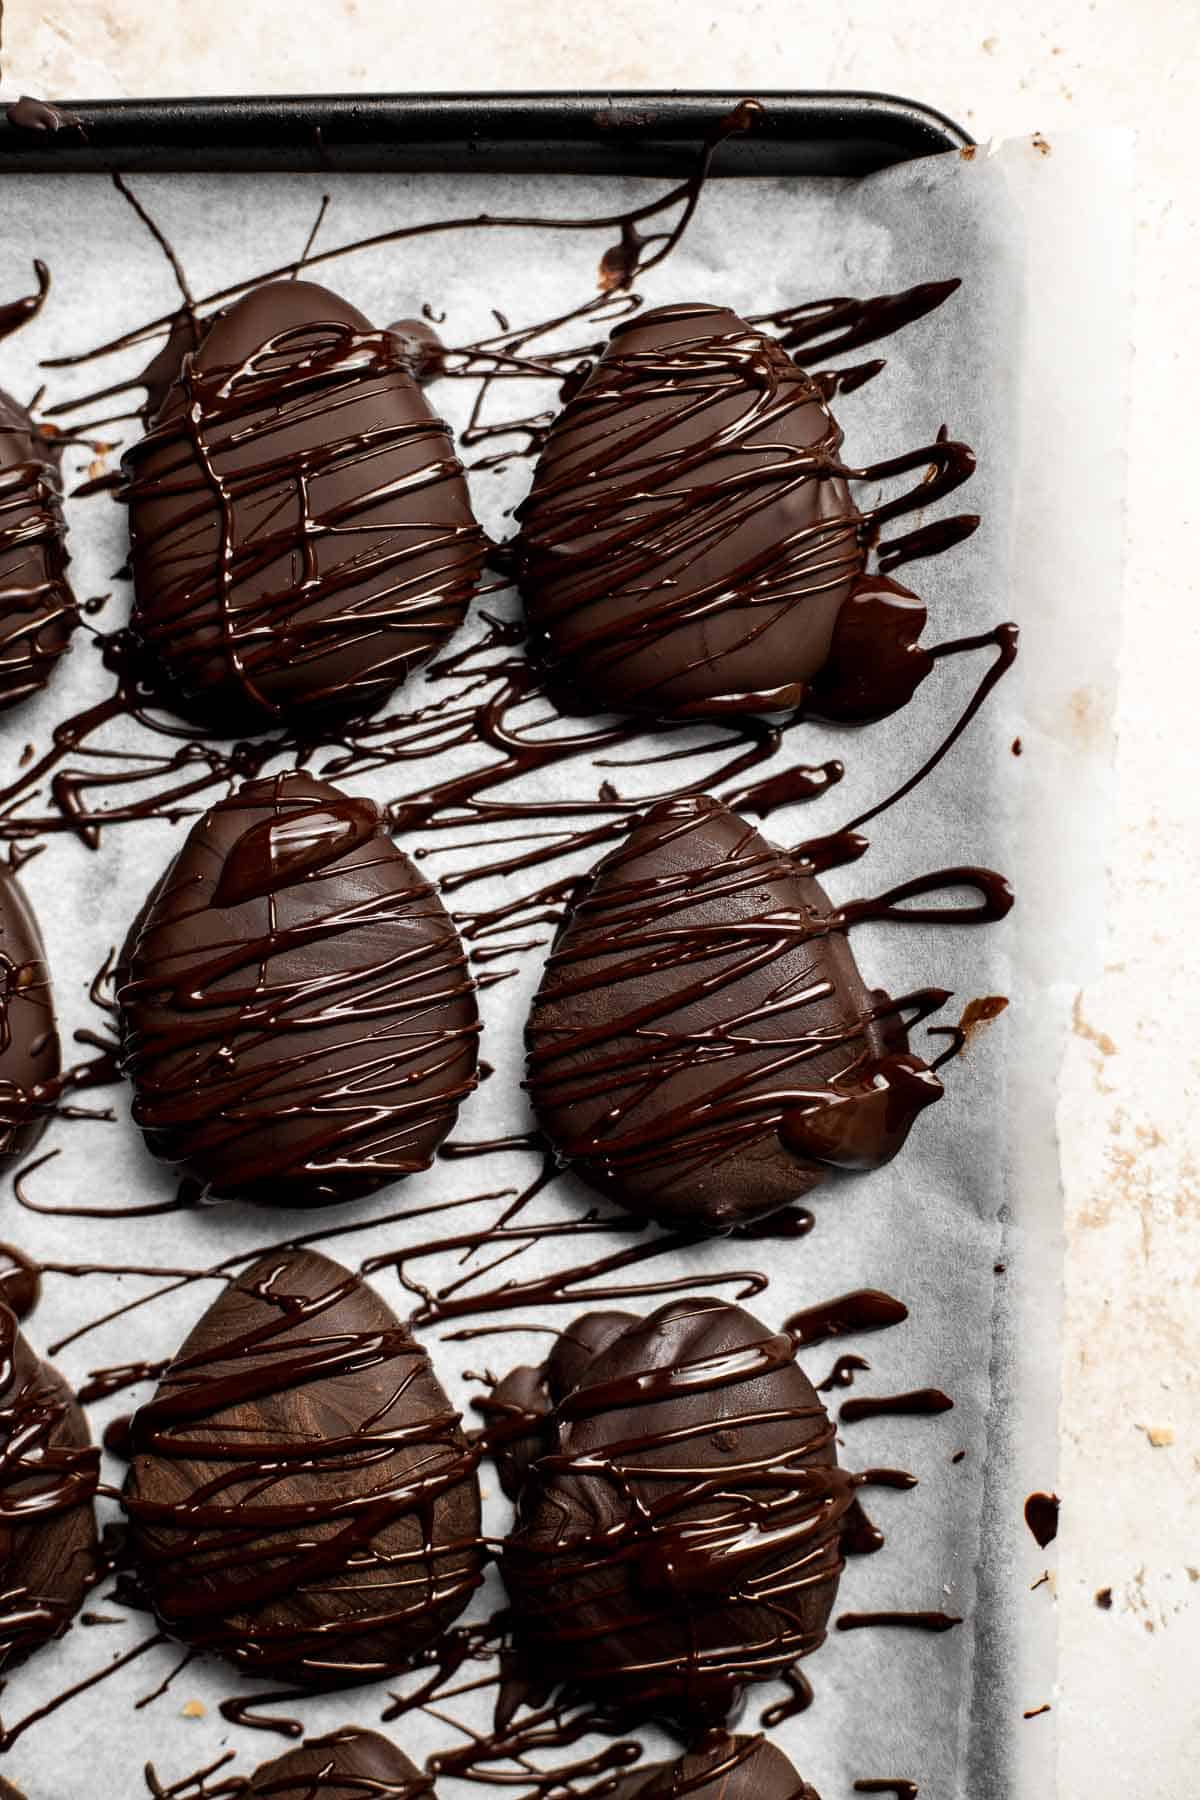 Chocolate-covered peanut butter eggs with a hard chocolate shell on the outside and a soft peanut butter interior inside are rich, sweet, and delicious. | aheadofthyme.com